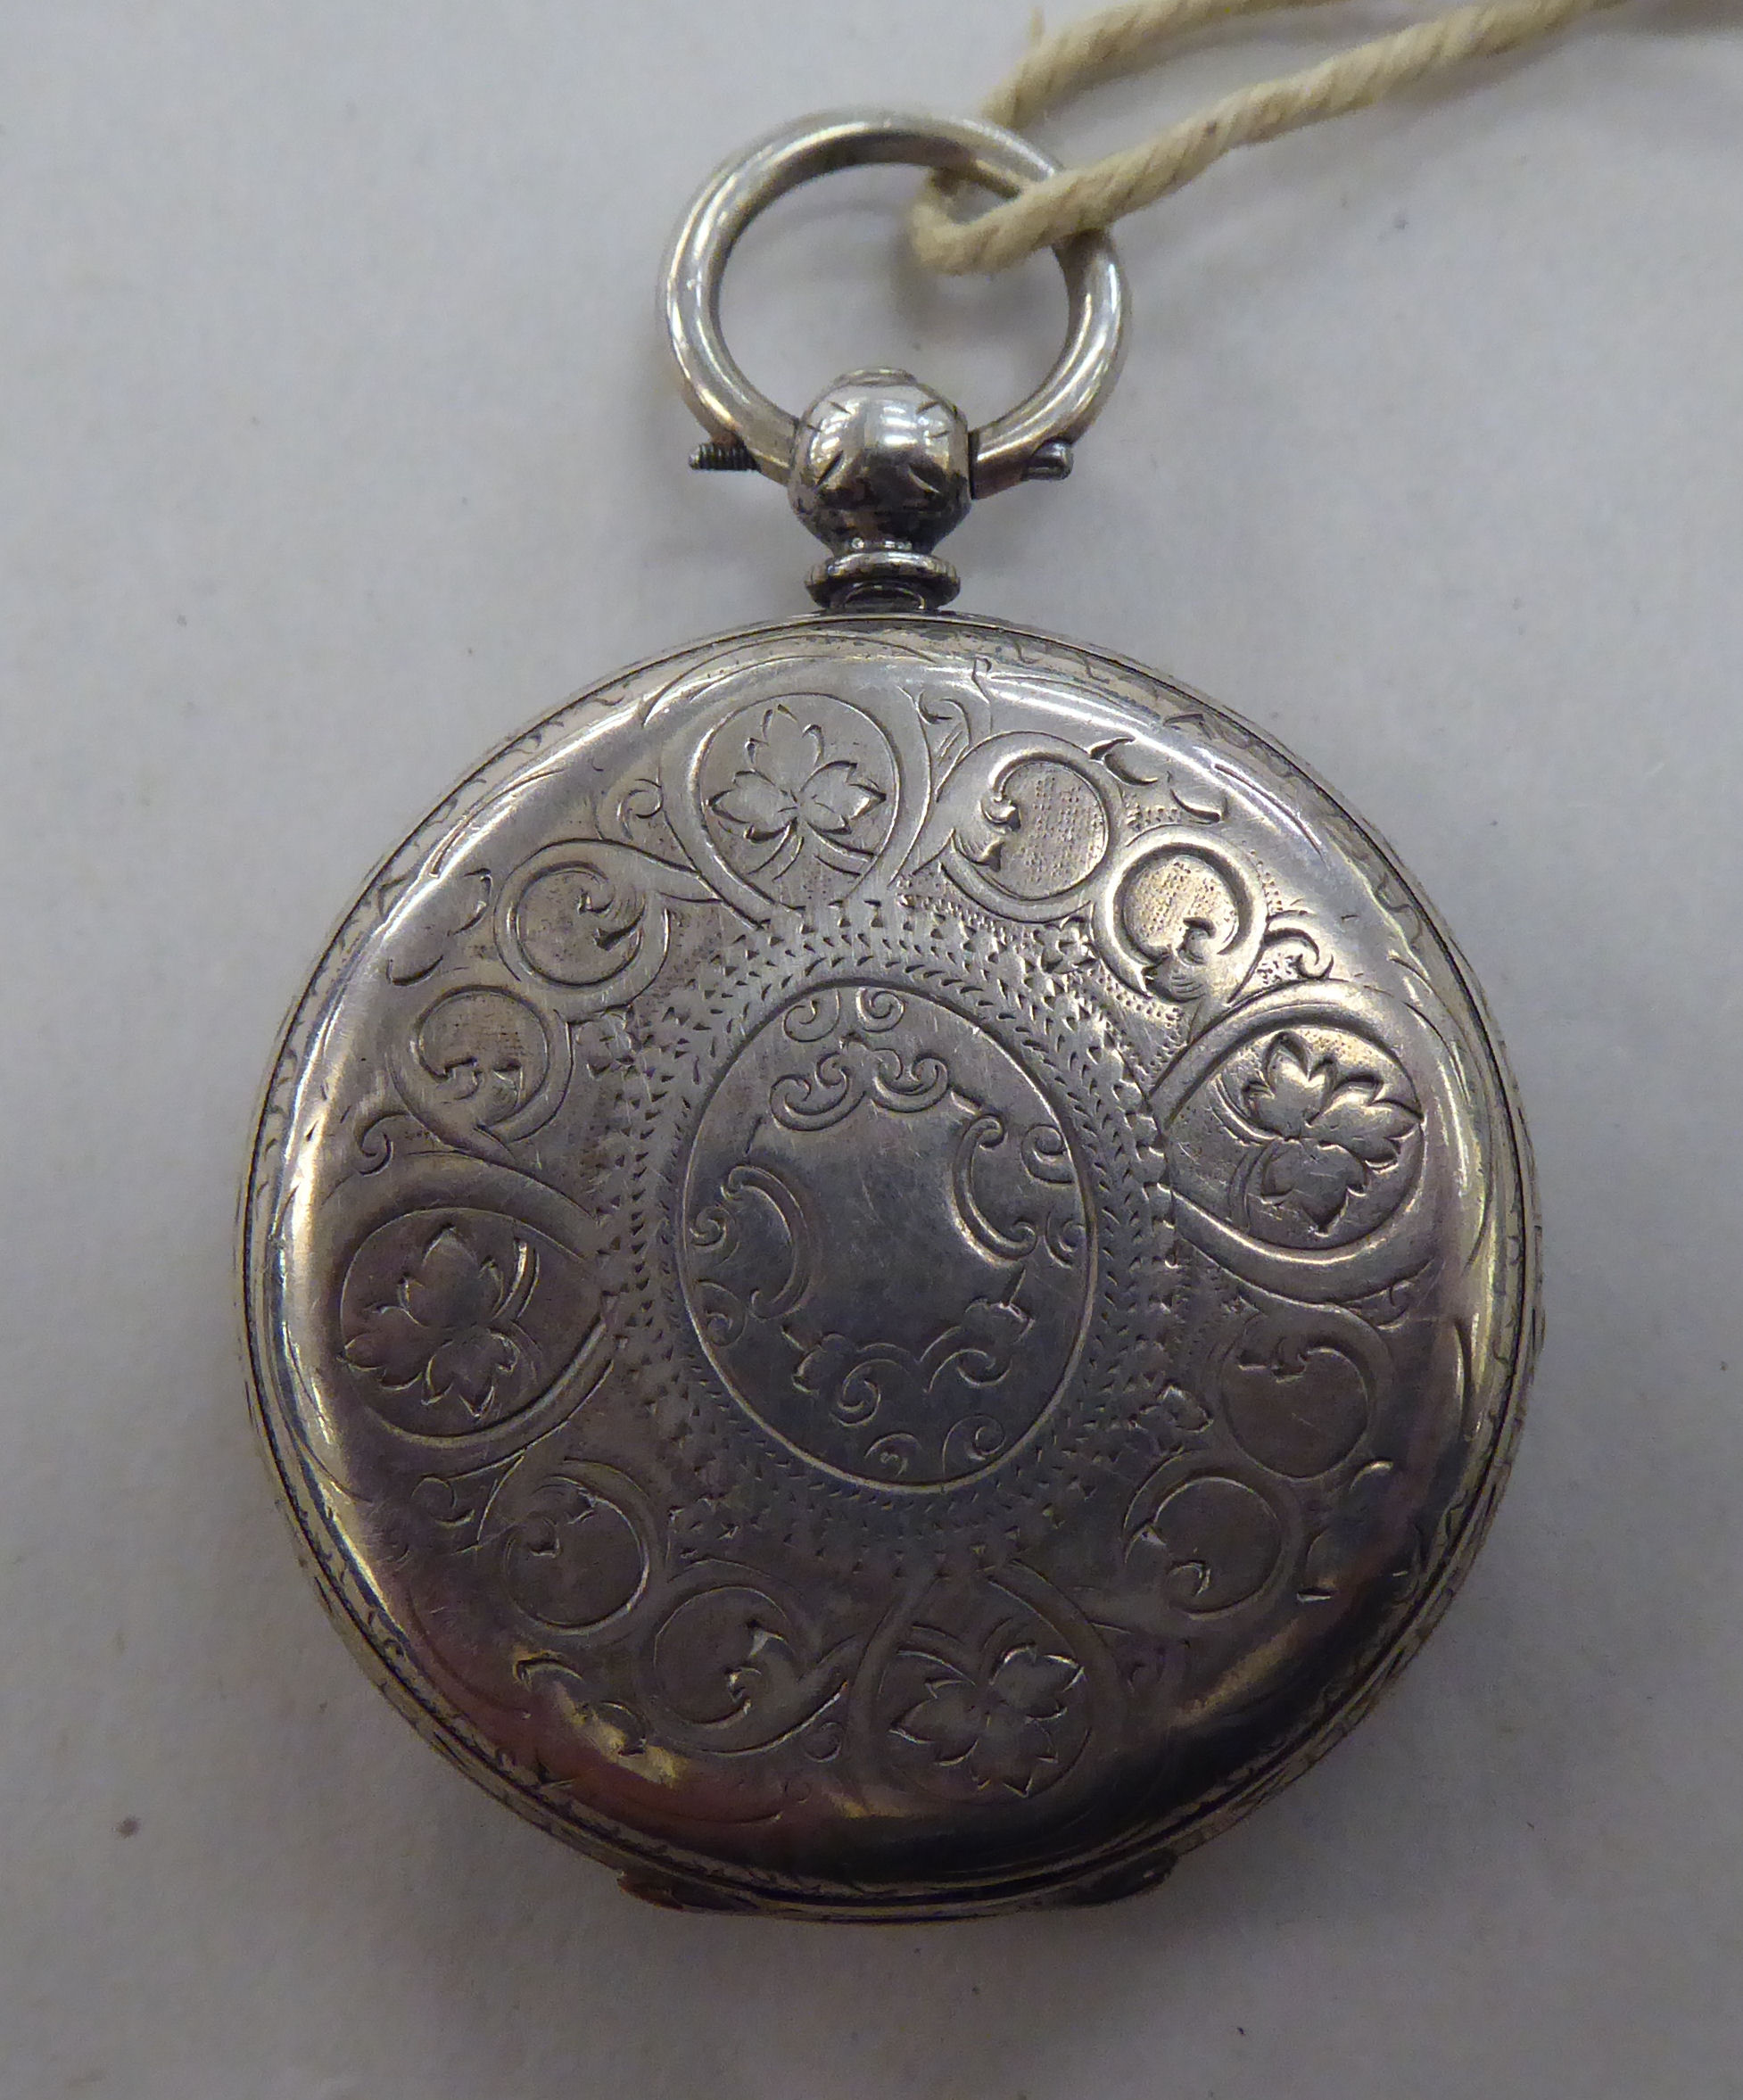 A silver cased pocket watch, faced with a Roman dial - Image 3 of 5